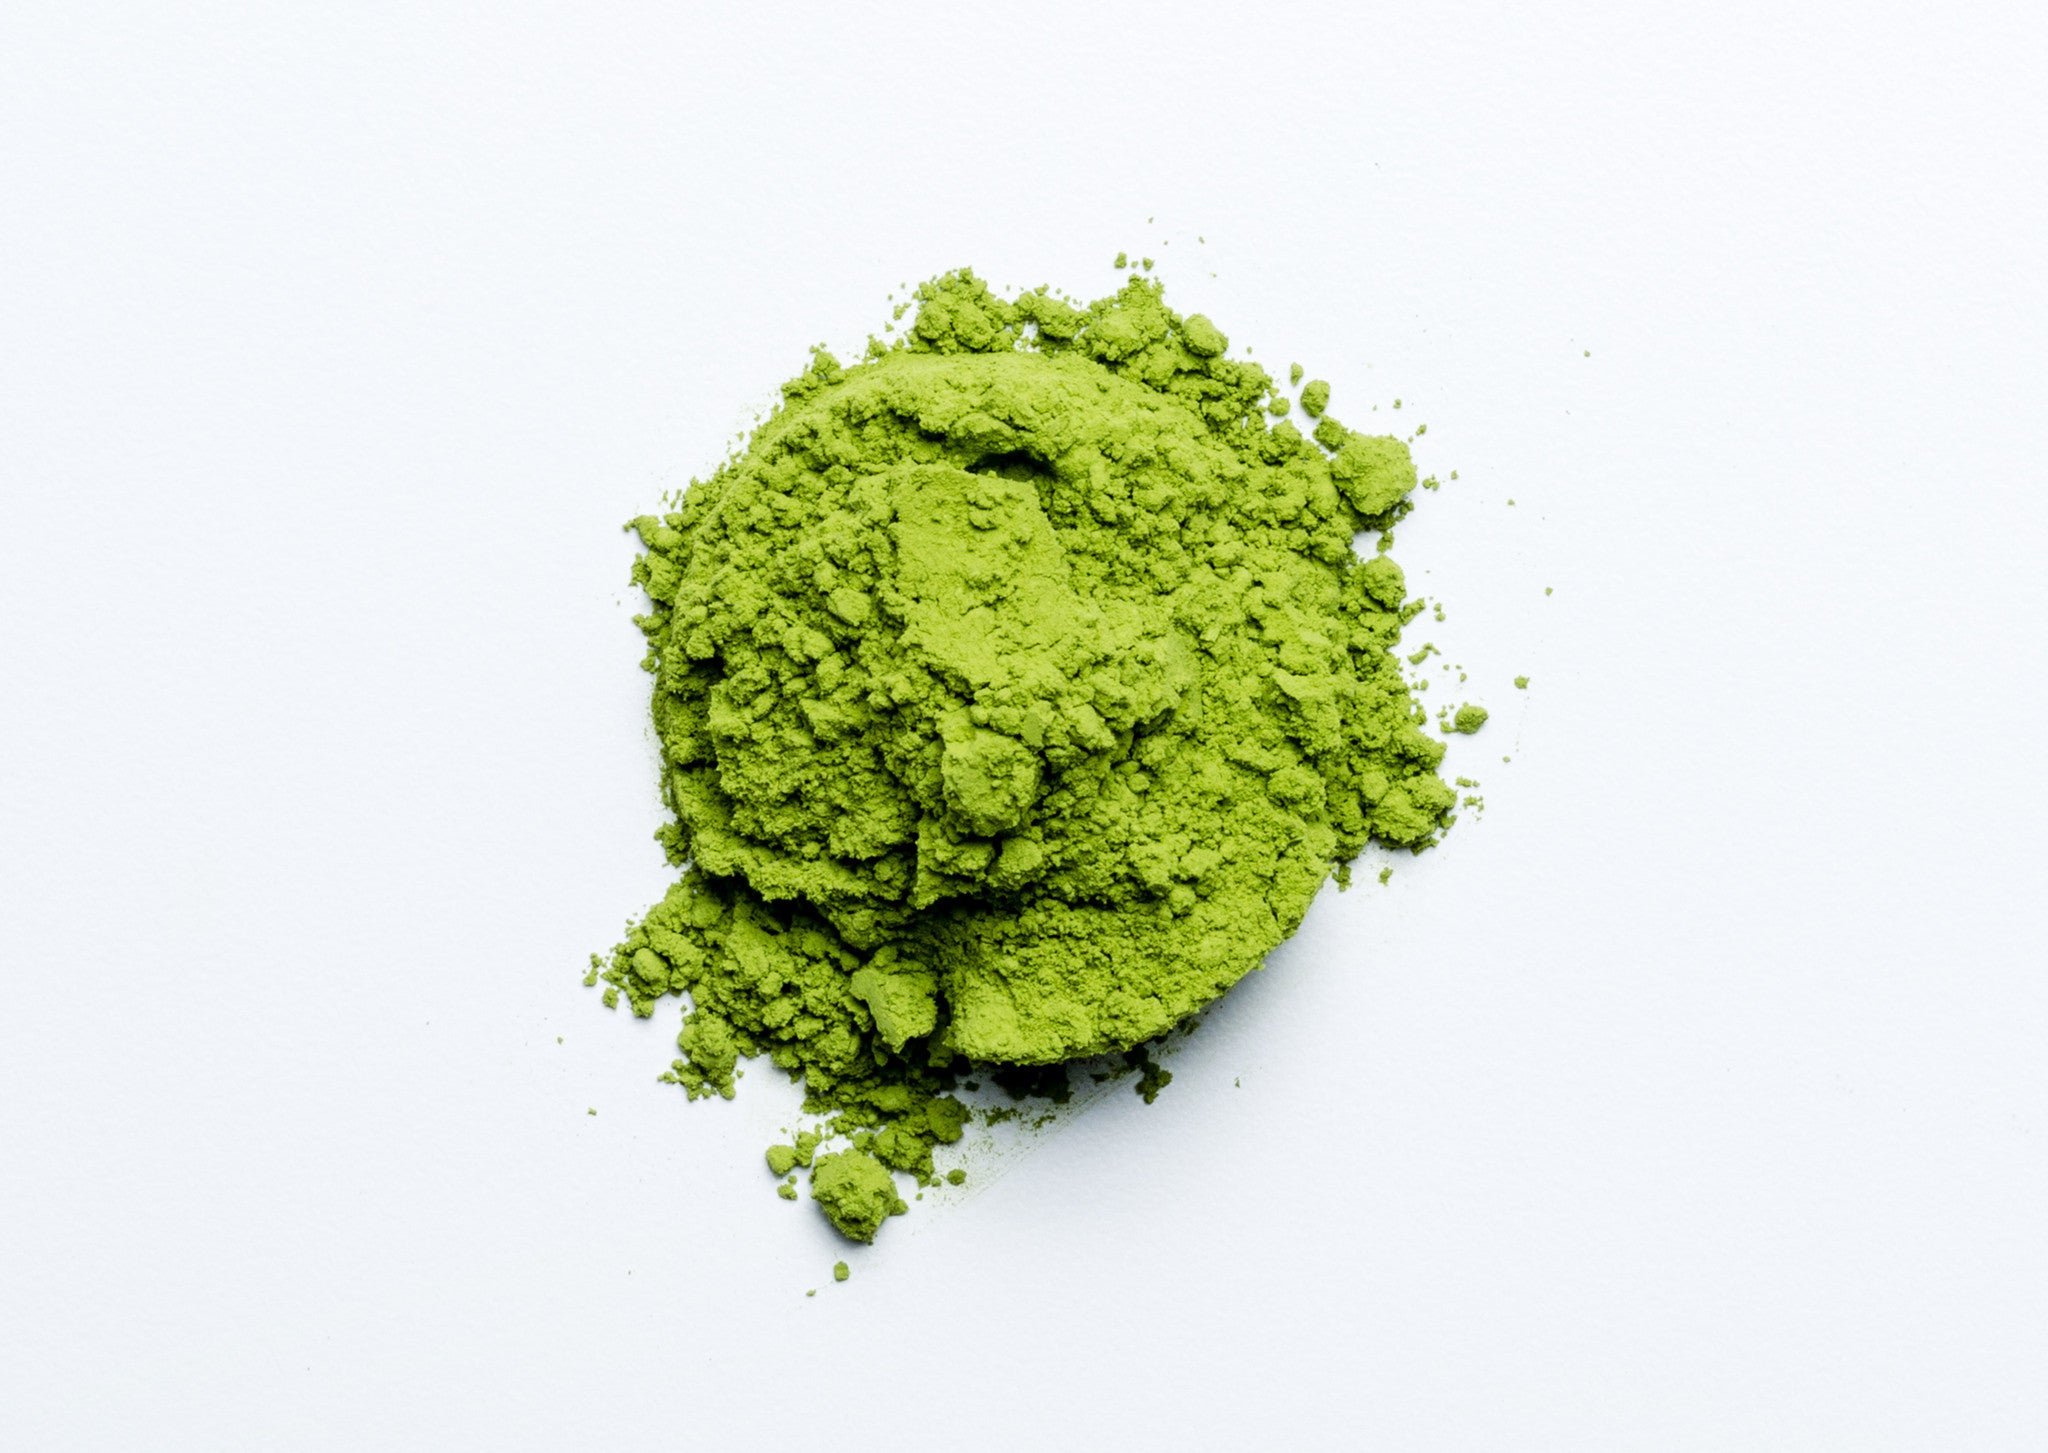 Matcha, Green Tea & Accessories from Japan - The World's Best Quality Matcha